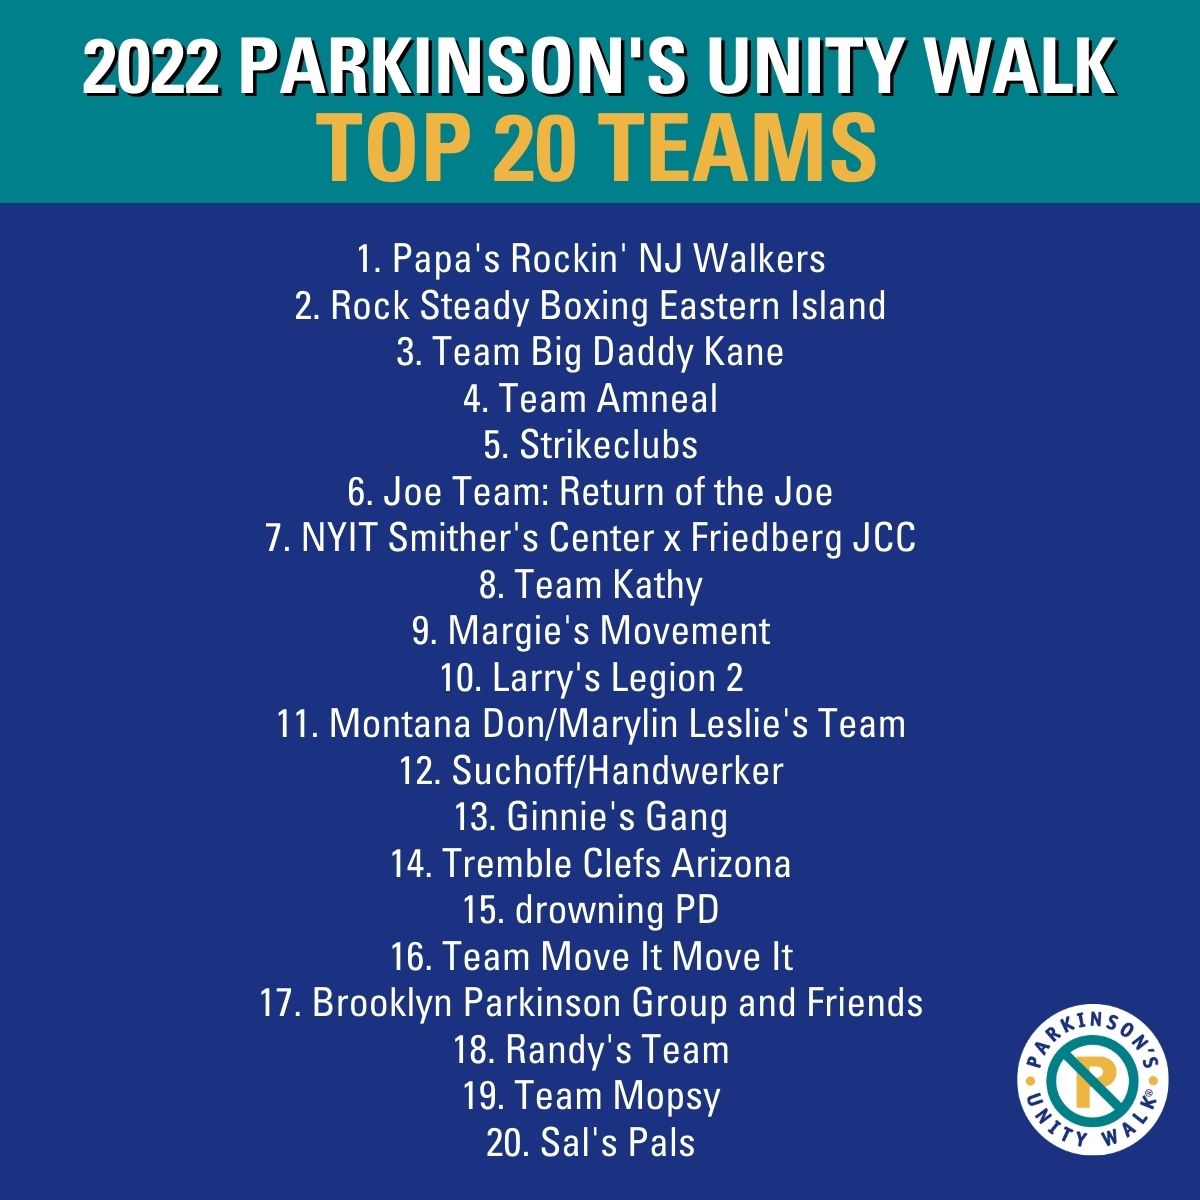 A shout-out and congratulations to this year's Top 20 Teams - together, they raised an incredible $360,015 in donations! One hundred percent of donations fund #Parkinsons disease research. Learn more about the results at bit.ly/3tOvI8k. #PUW2022